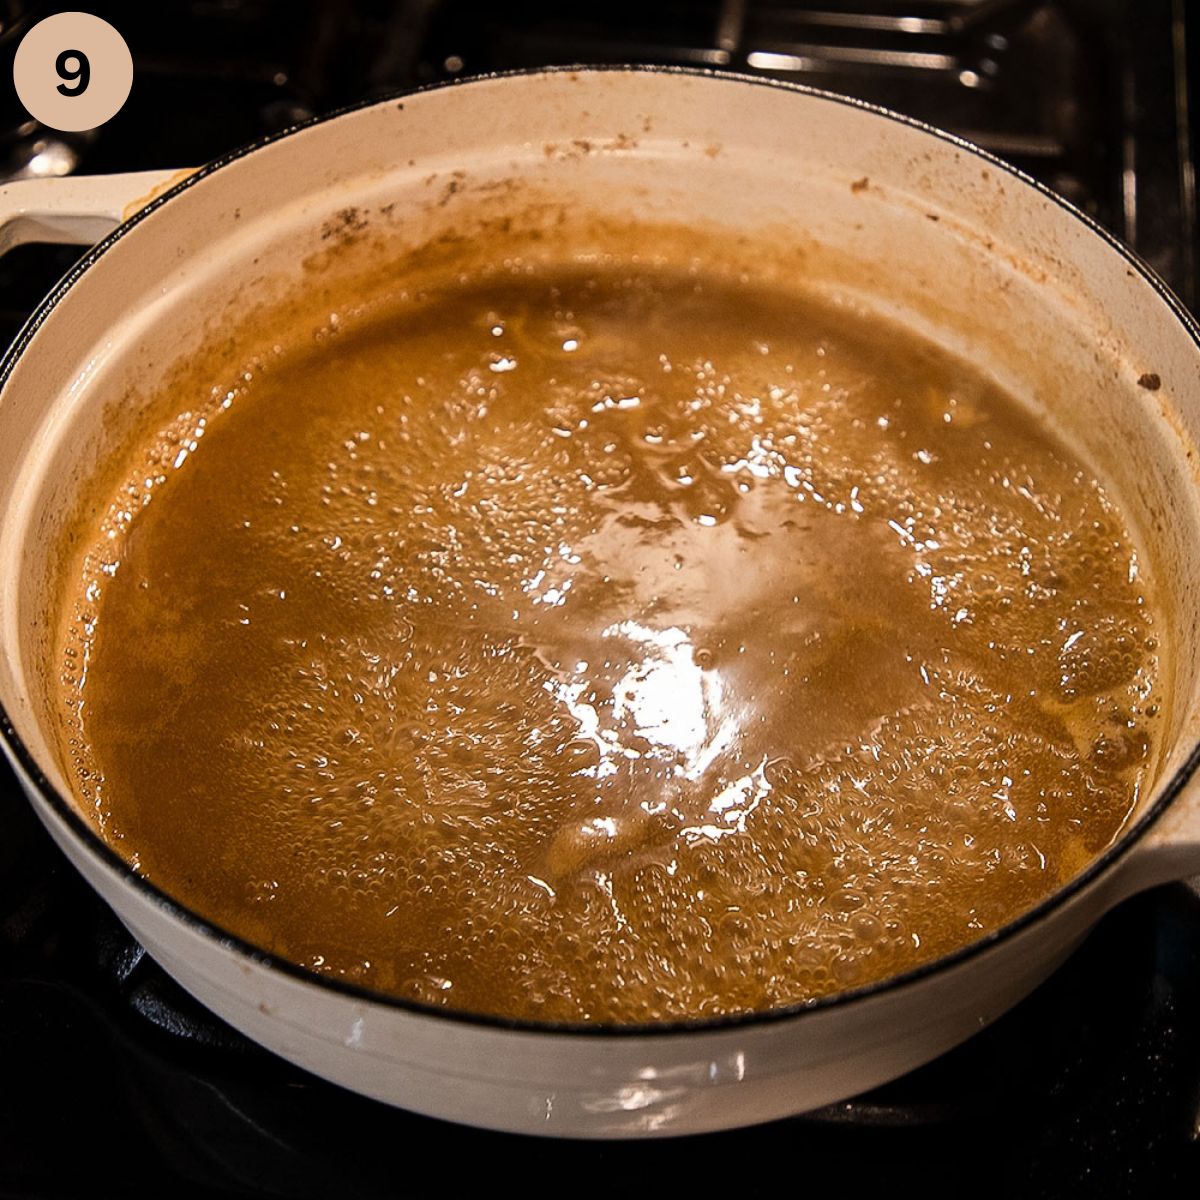 cooking orange sauce for veal in dutch oven.